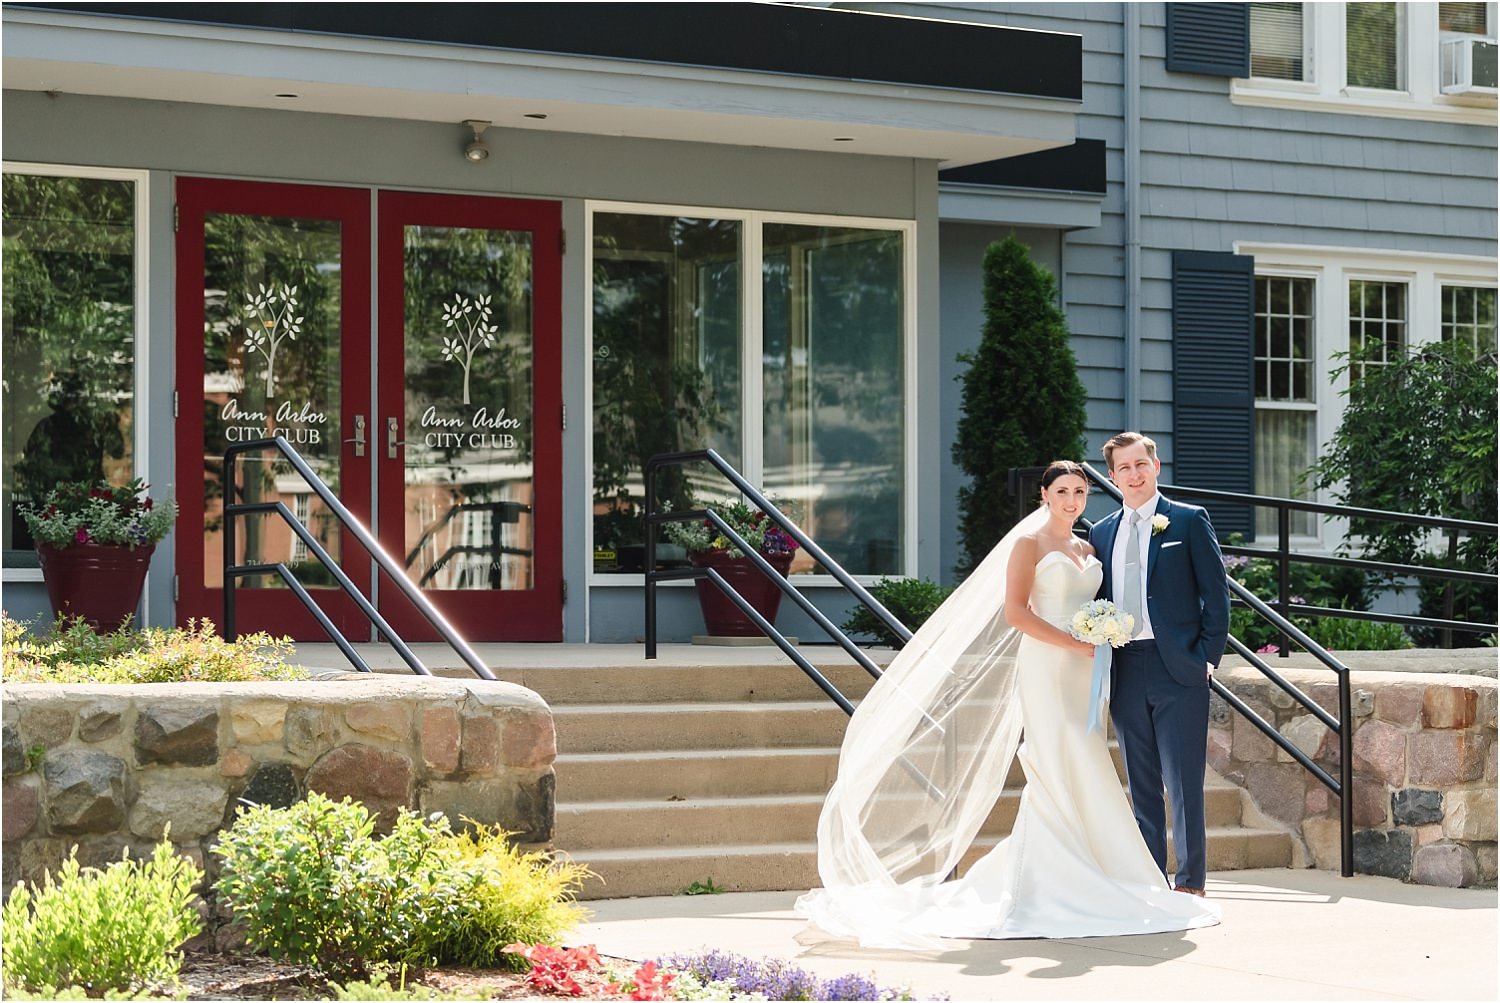  A newly married couple stands in front of the doors at the City Club in Ann Arbor.  